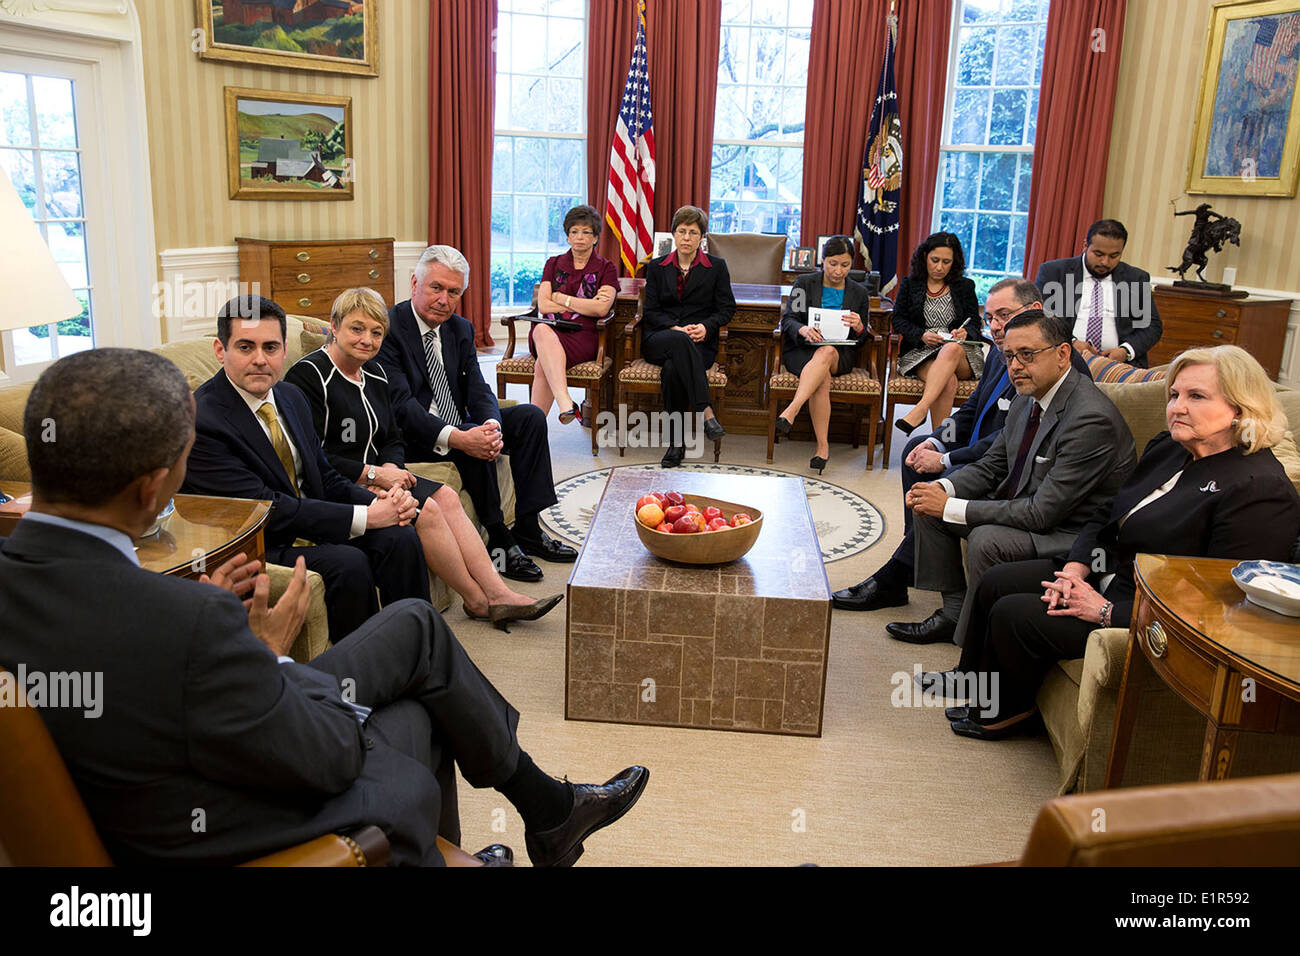 US President Barack Obama meets with faith leaders to discuss immigration reform in the Oval Office of the White House April 15, 2014 in Washington, DC. Stock Photo